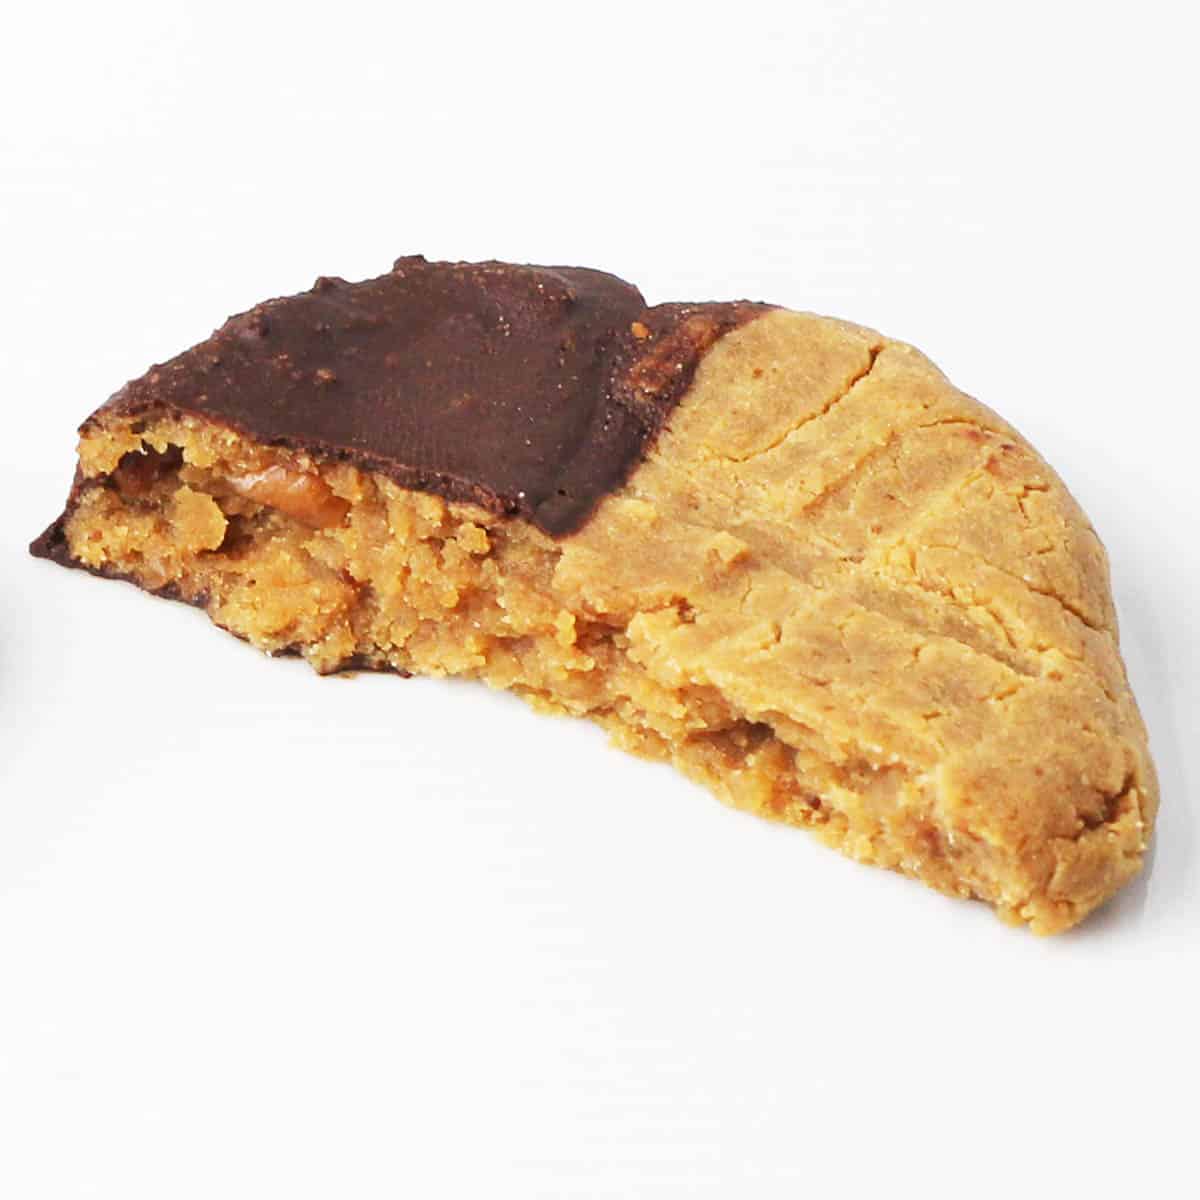 half of a chocolate dipped peanut butter protein cookie on a white background